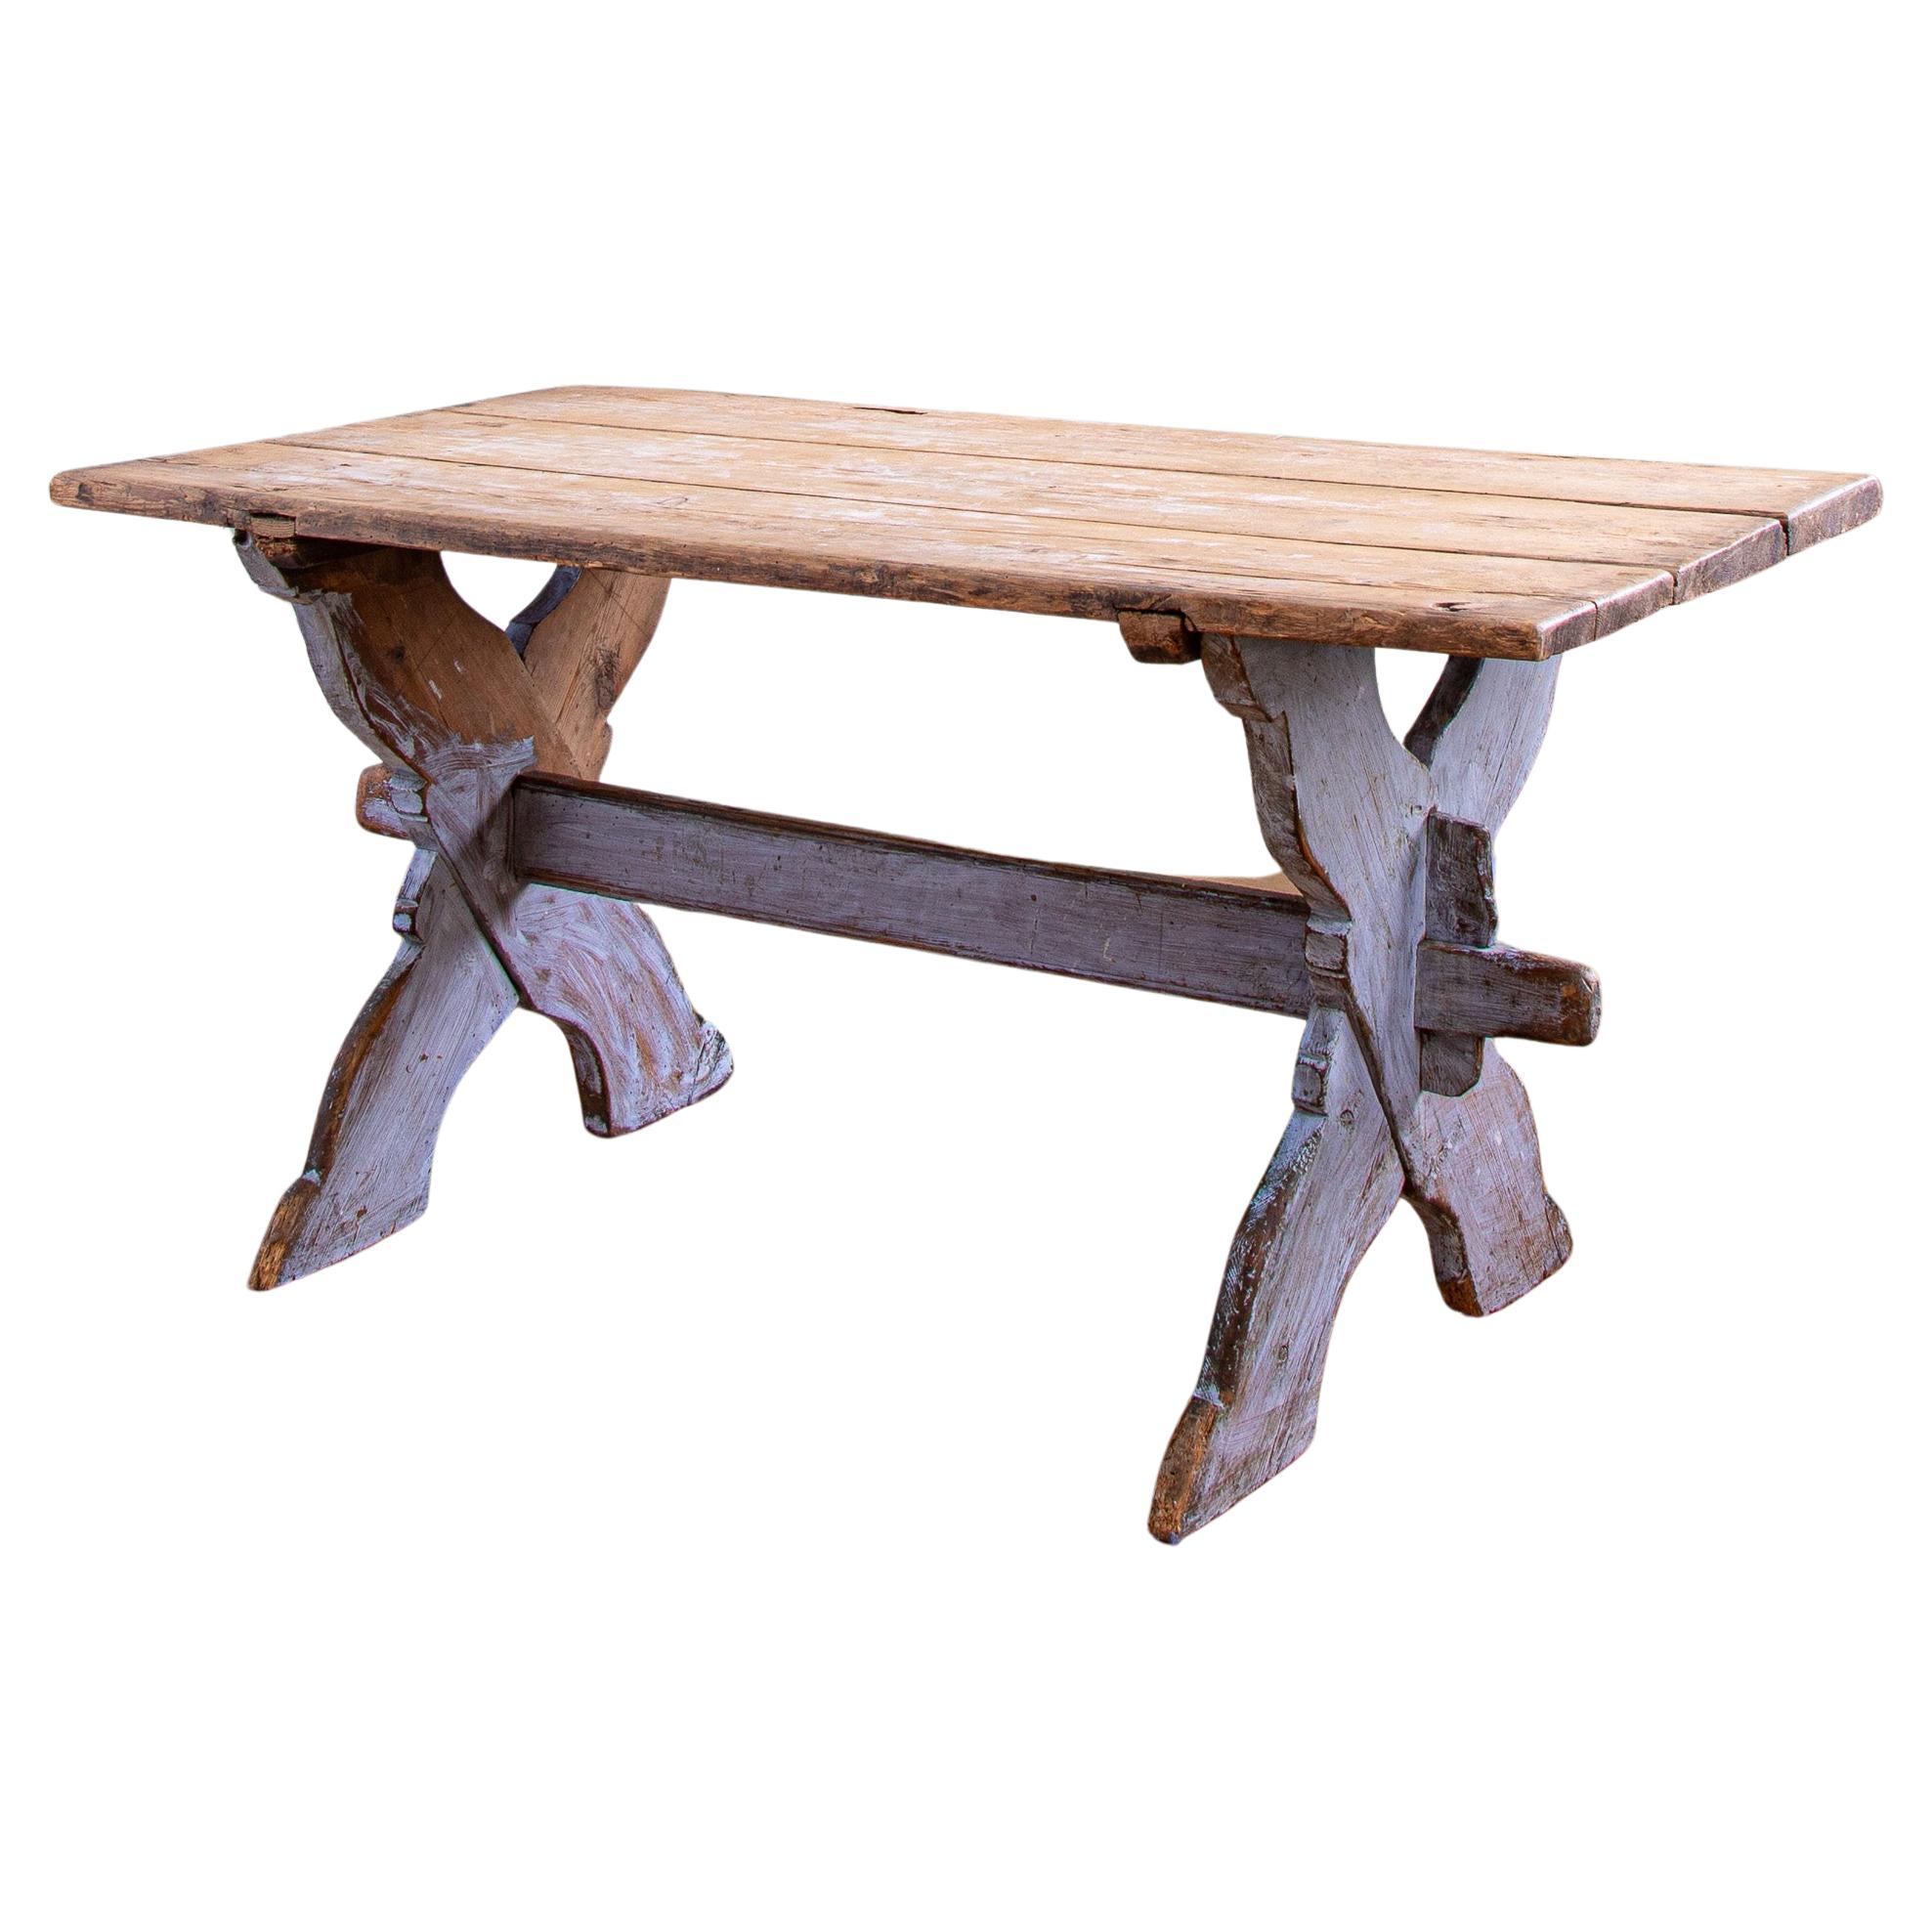 Antique Rustic Swedish Farm House Table With Chalk Blue Patina Circa 1860 For Sale